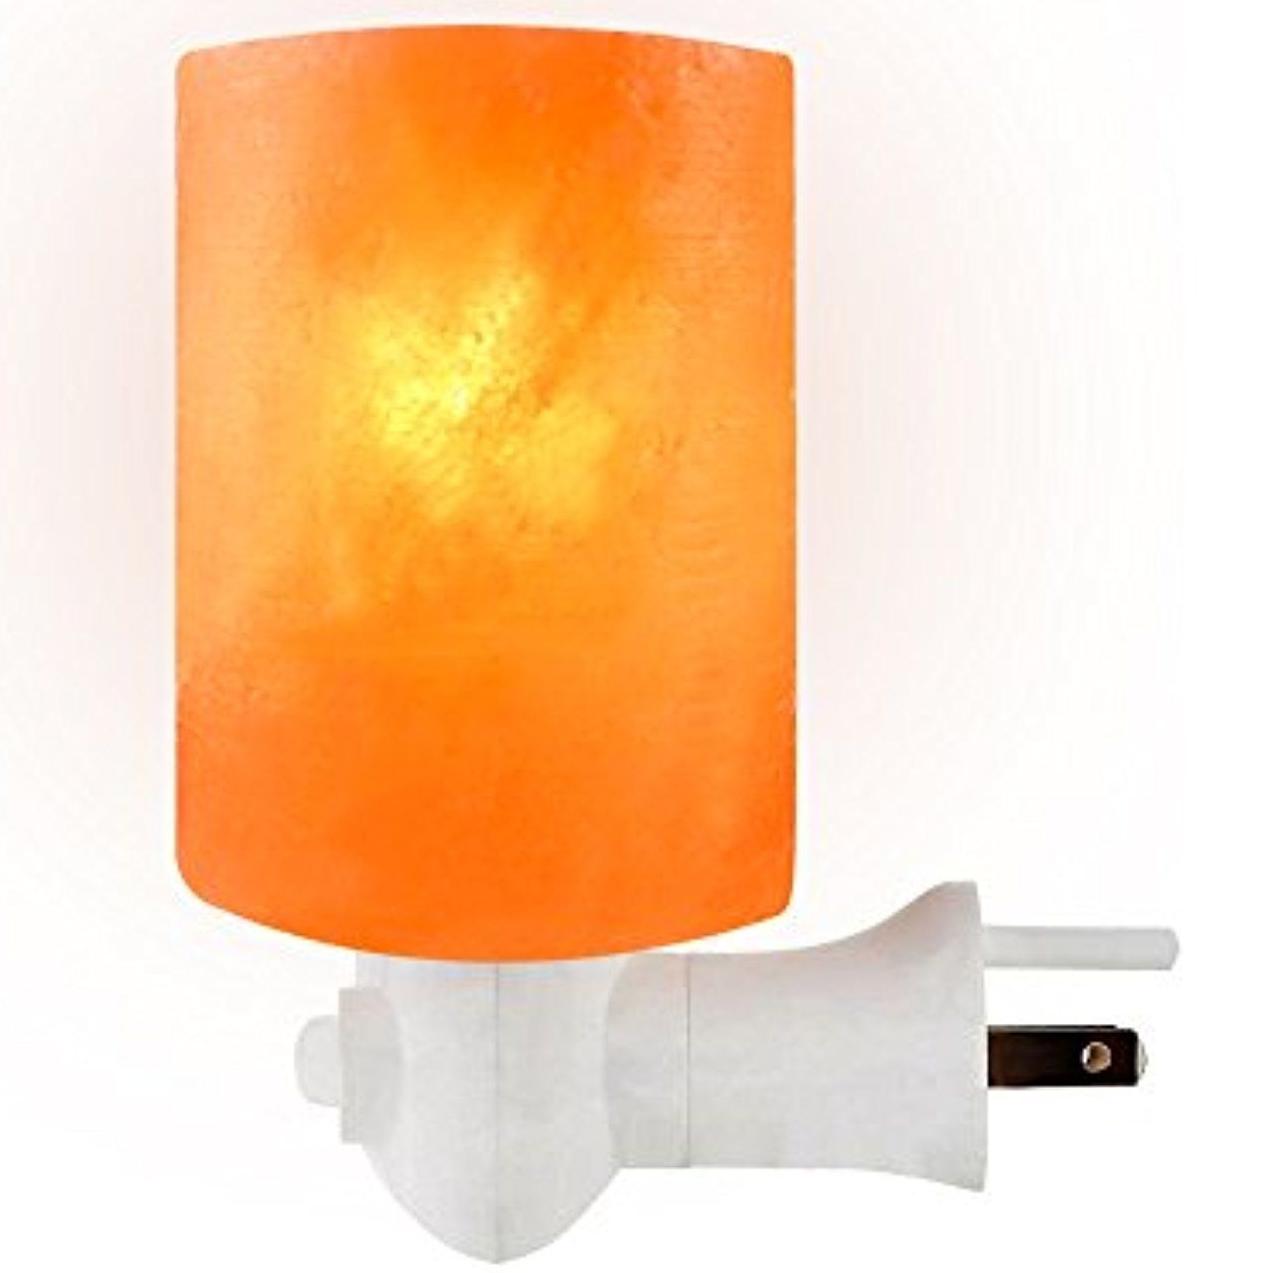 Cylinder Shaped Himalayan Salt Night Light For Home Decoration Asthma And Allergy Patients To Clean Room Atmosphere